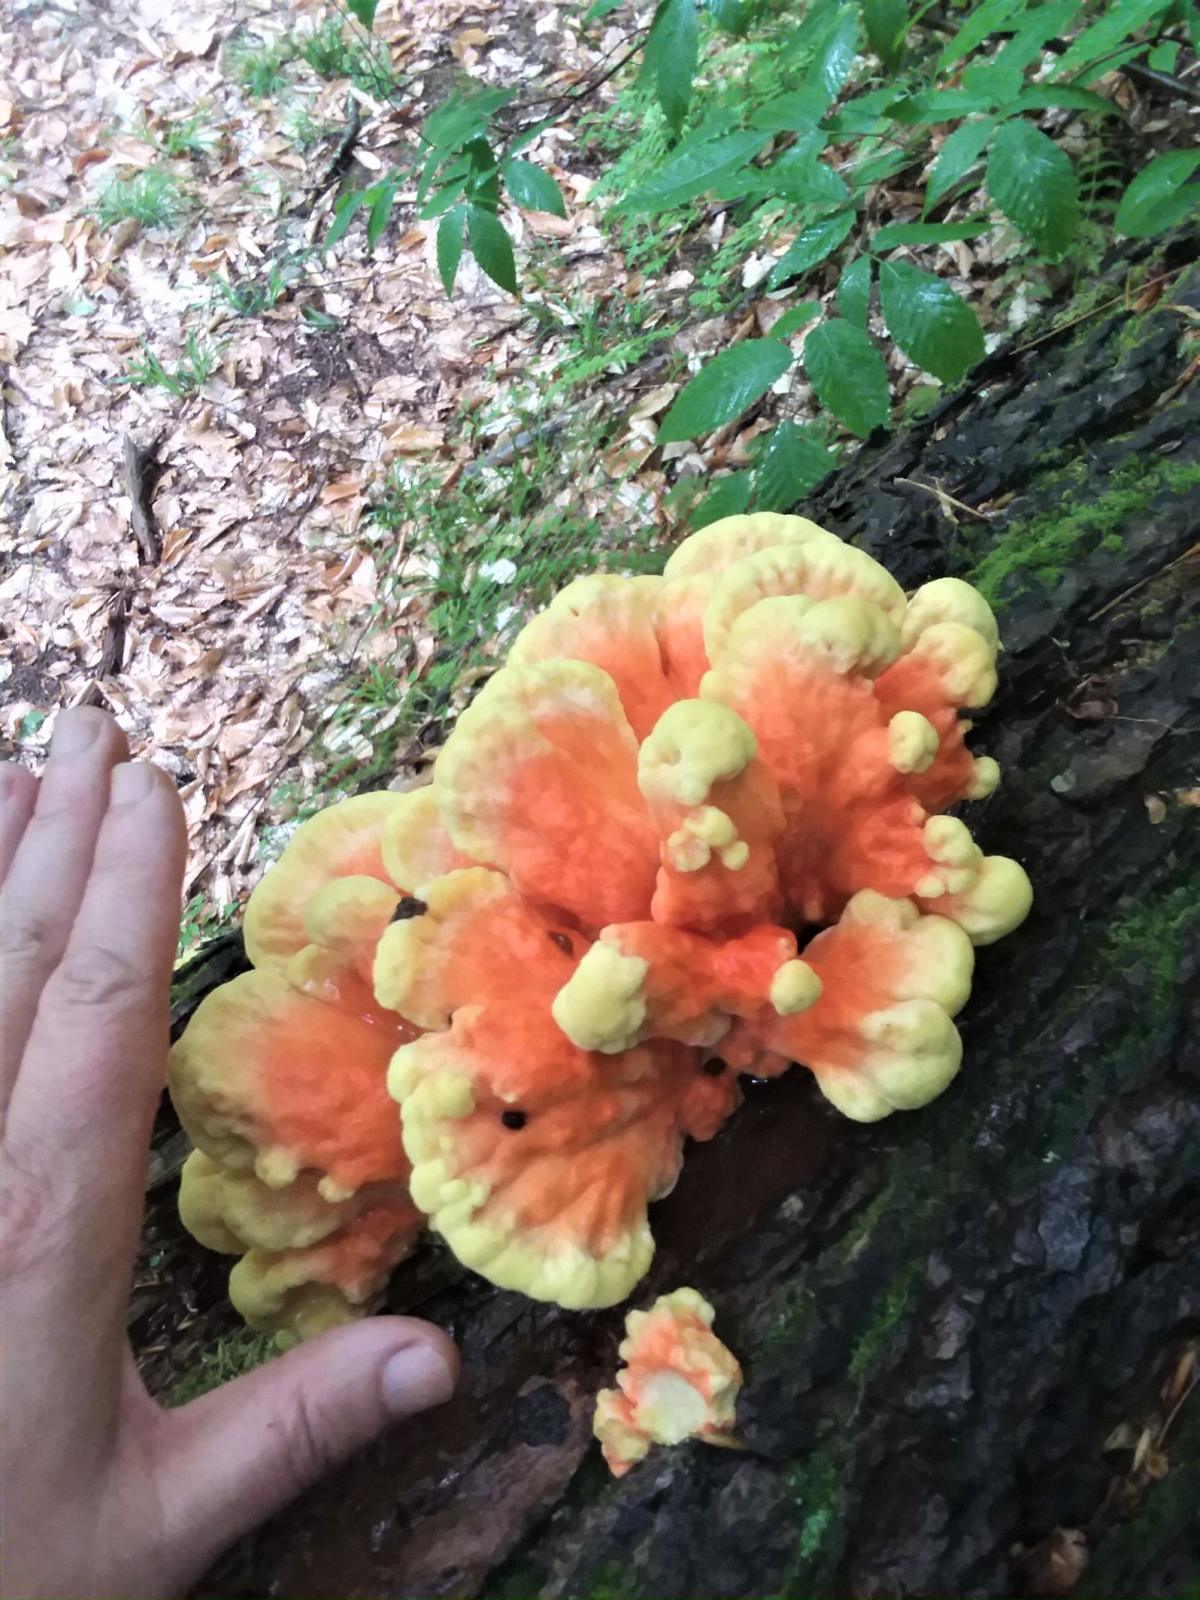 Young chicken of the woods growing on a log